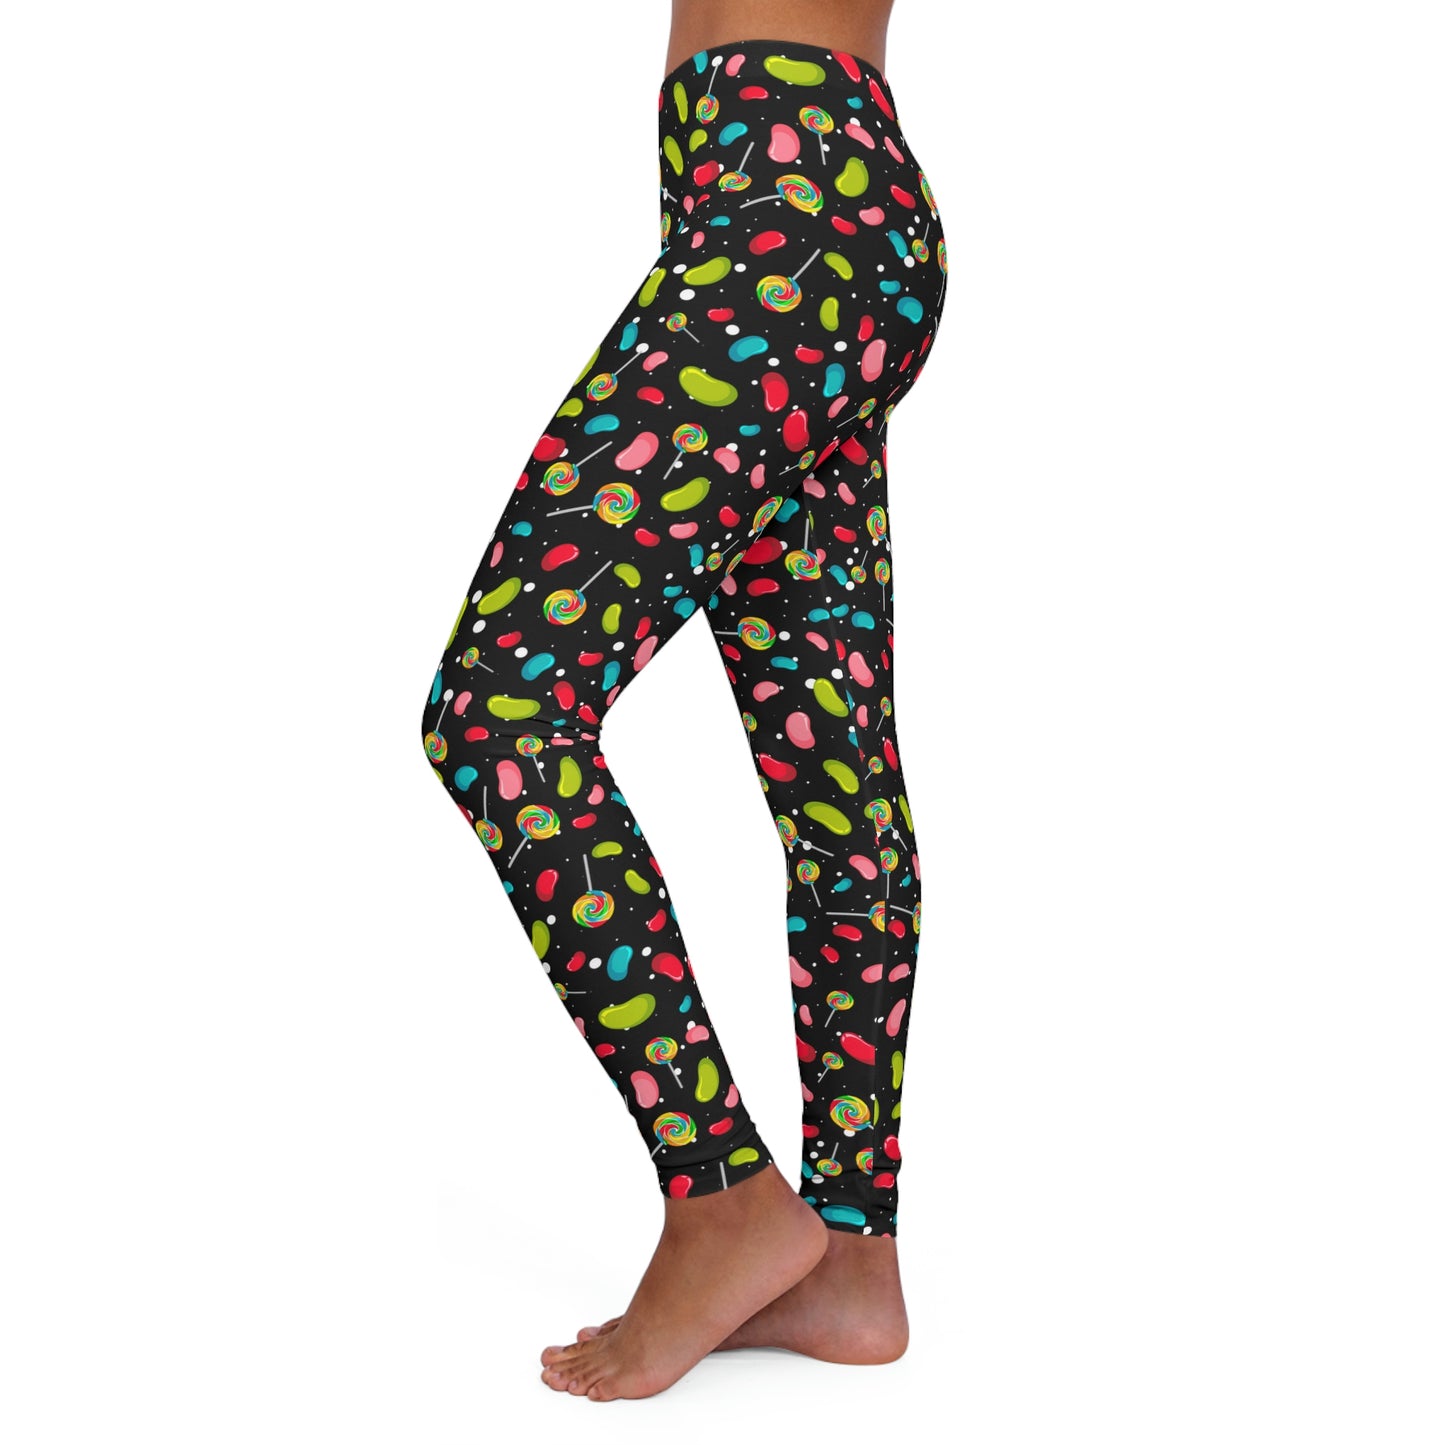 Women's Candy Summer Leggings . One of a Kind Workout Activewear tights for Mothers Day, Girlfriend, Gift for Her